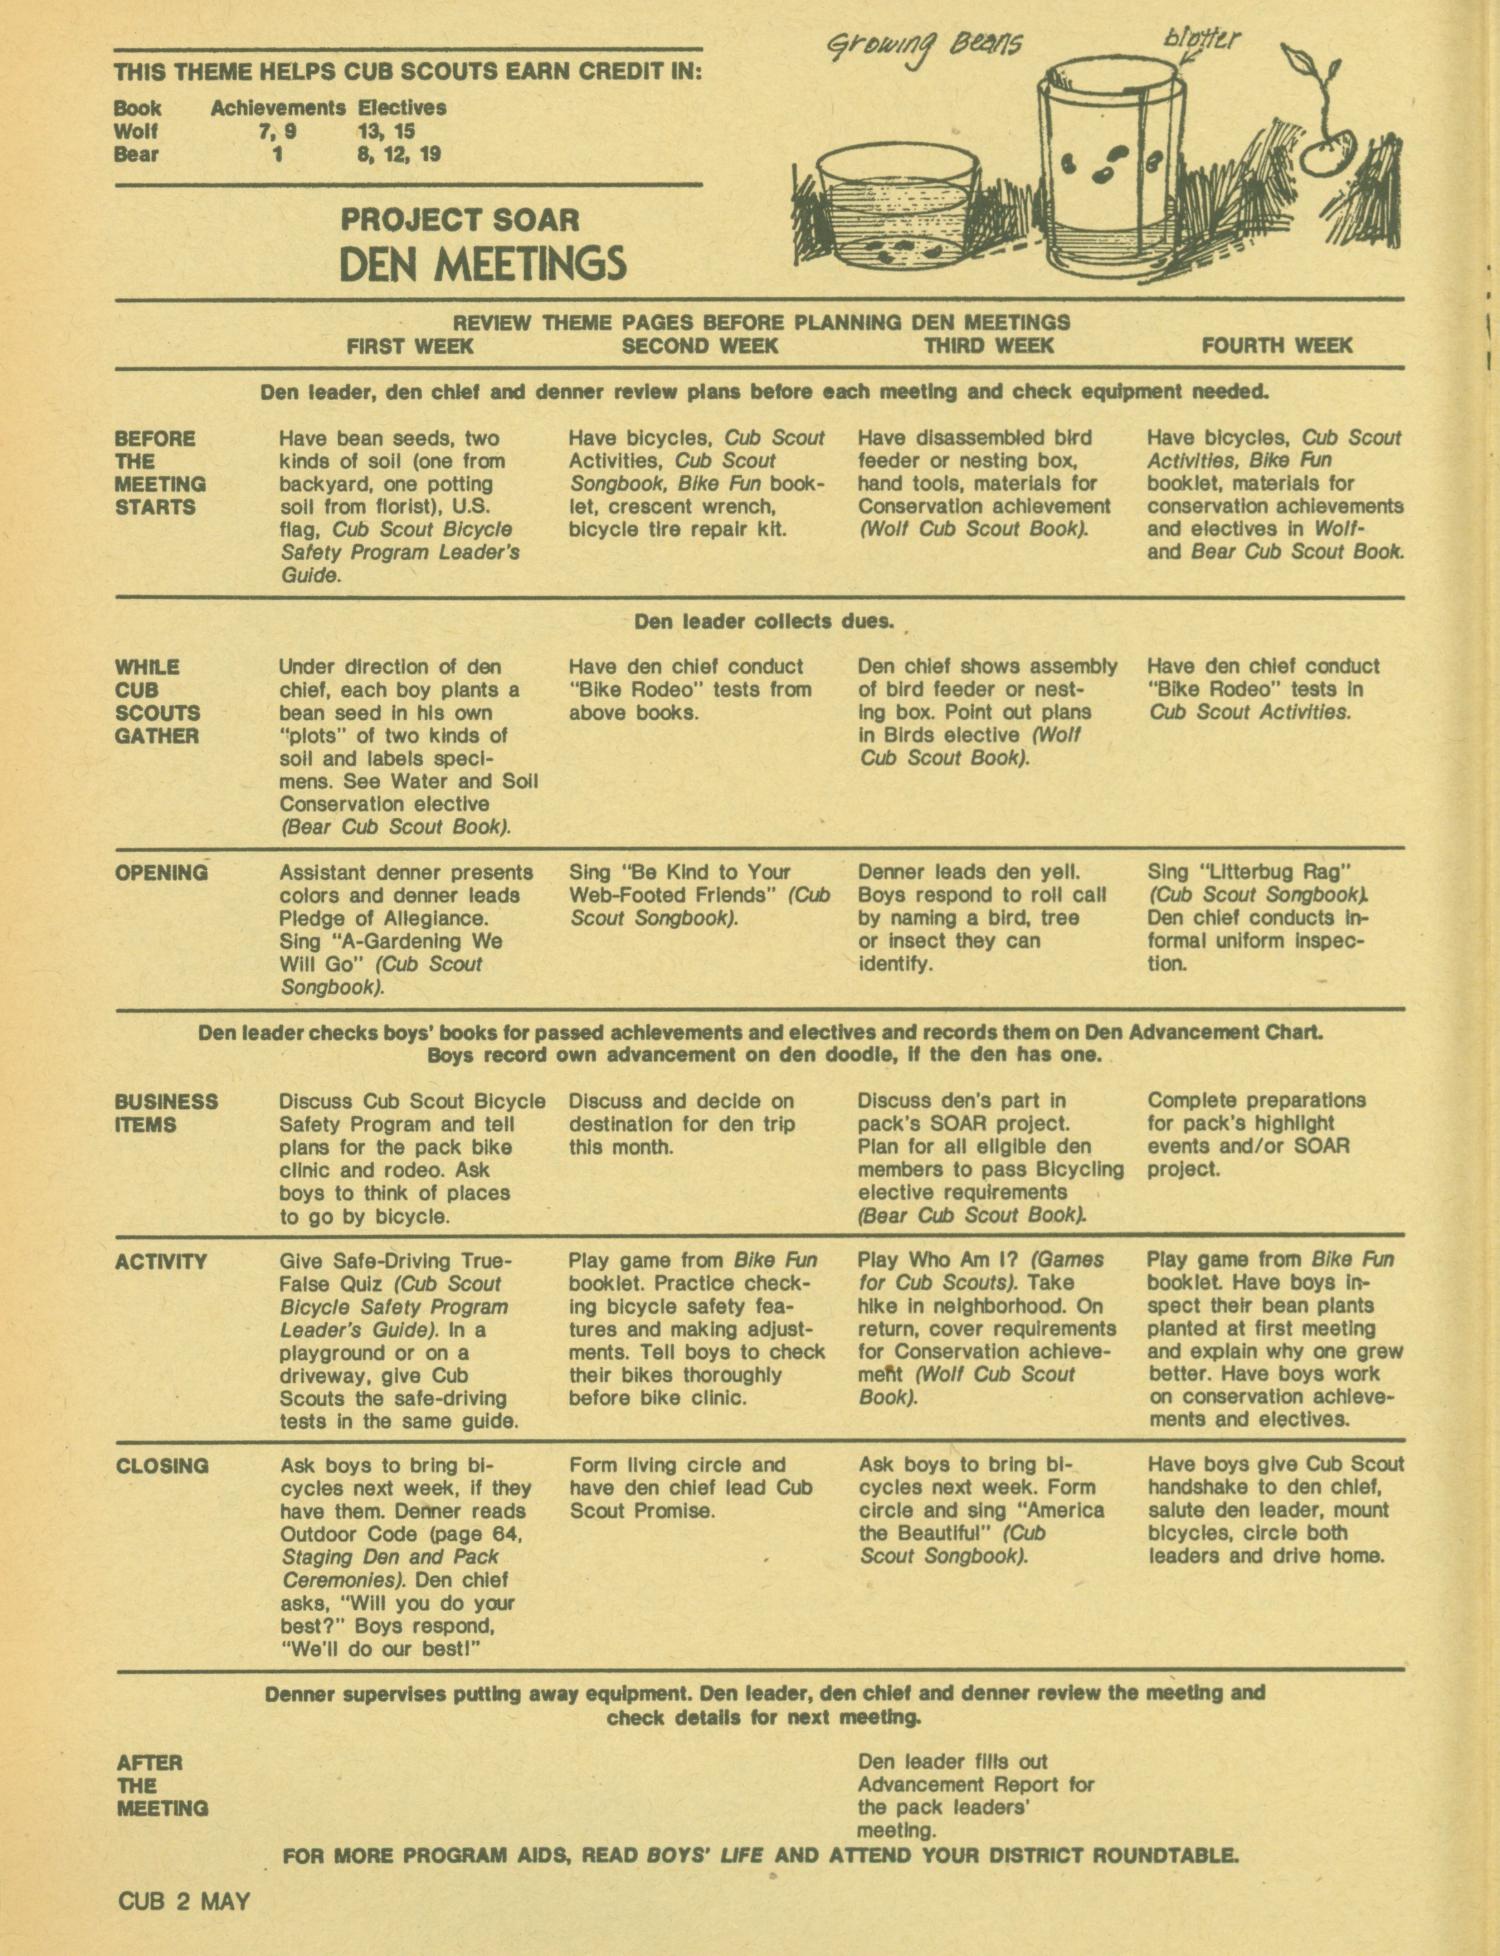 Scouting, Volume 64, Number 2, March-April 1976
                                                
                                                    2
                                                